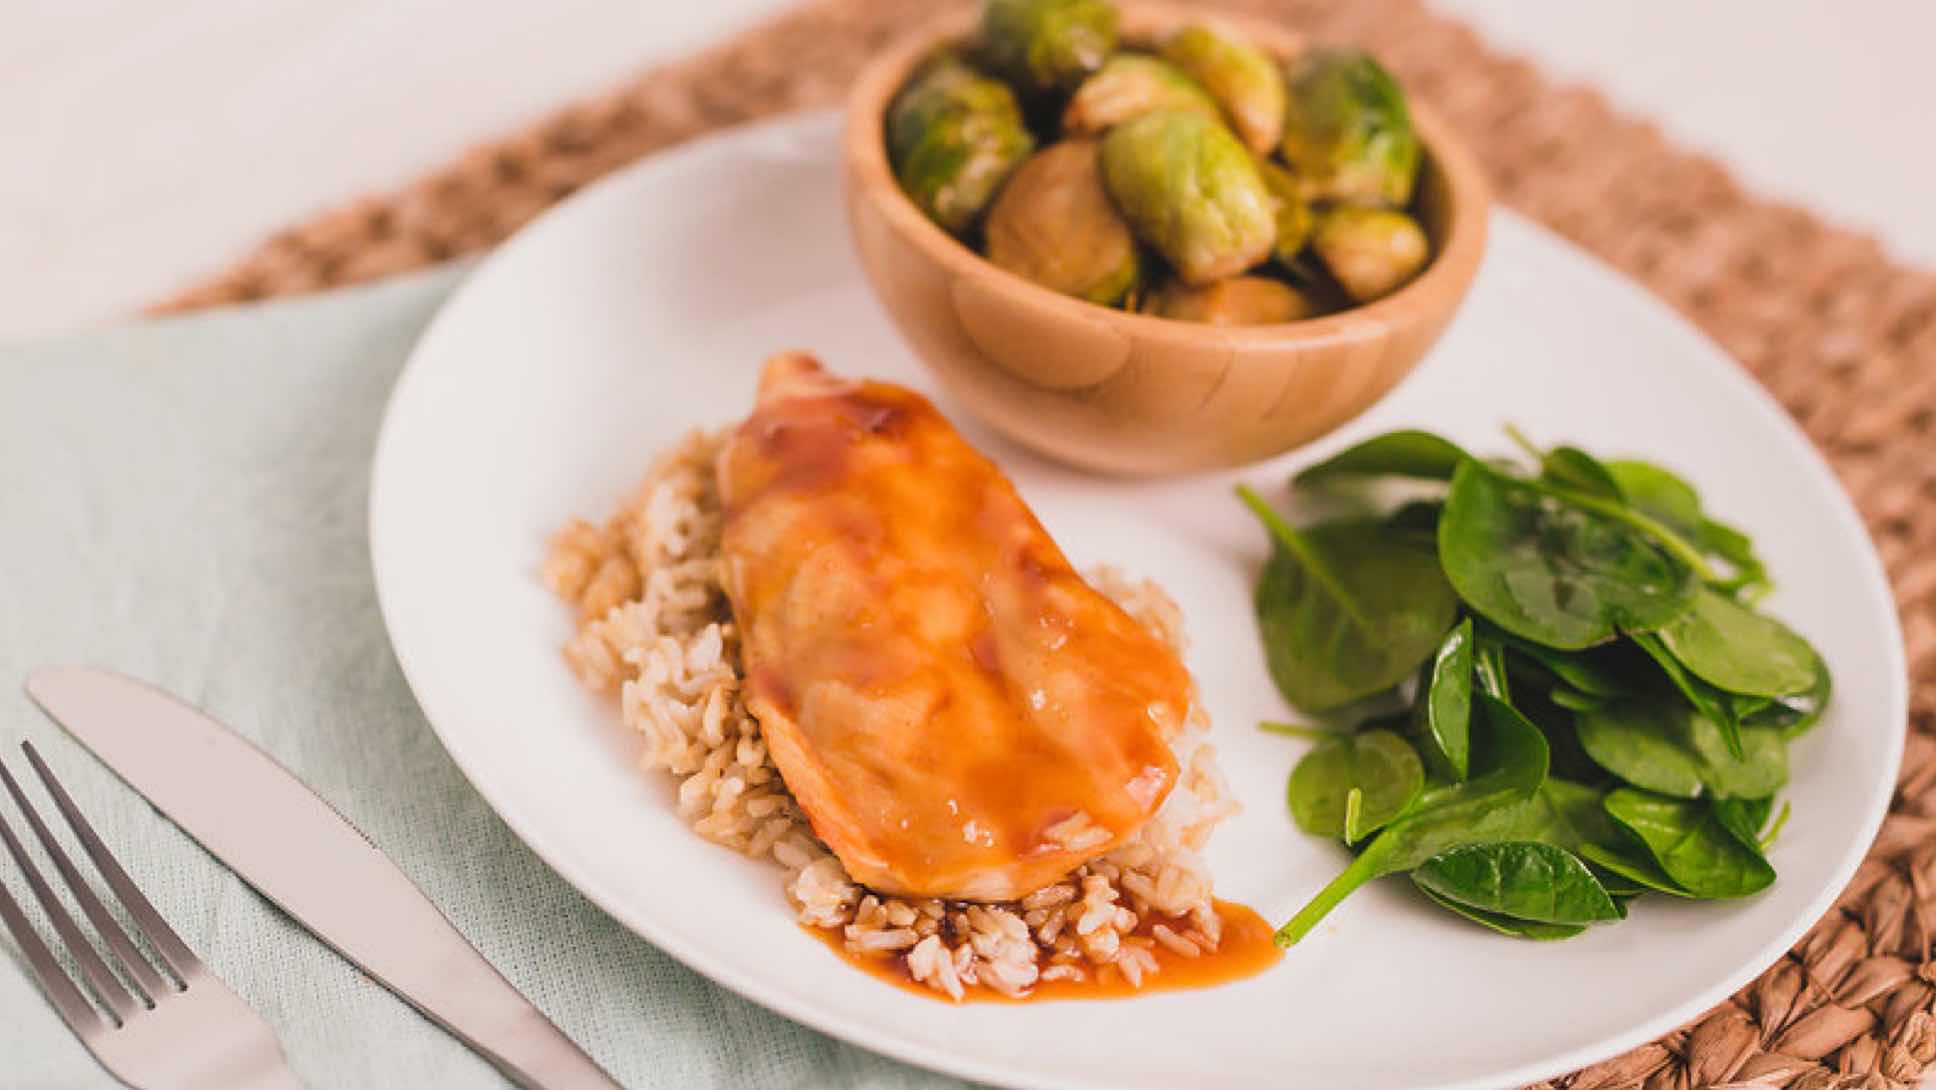 Chicken breast, brown rice, Brussels sprouts and spinach on a plate.